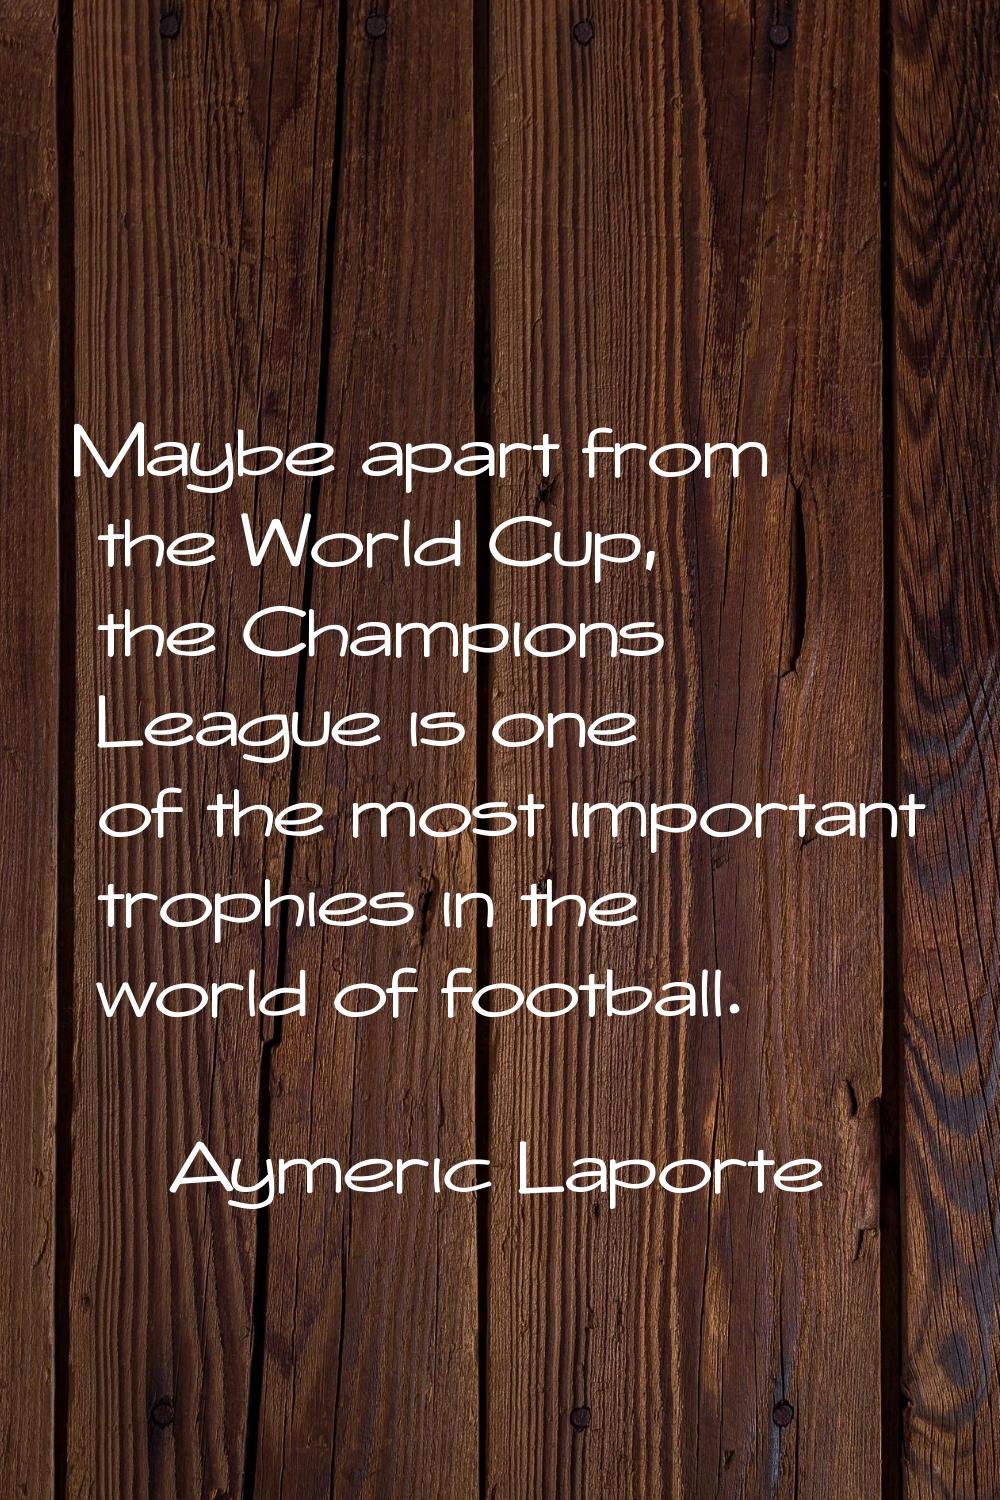 Maybe apart from the World Cup, the Champions League is one of the most important trophies in the w